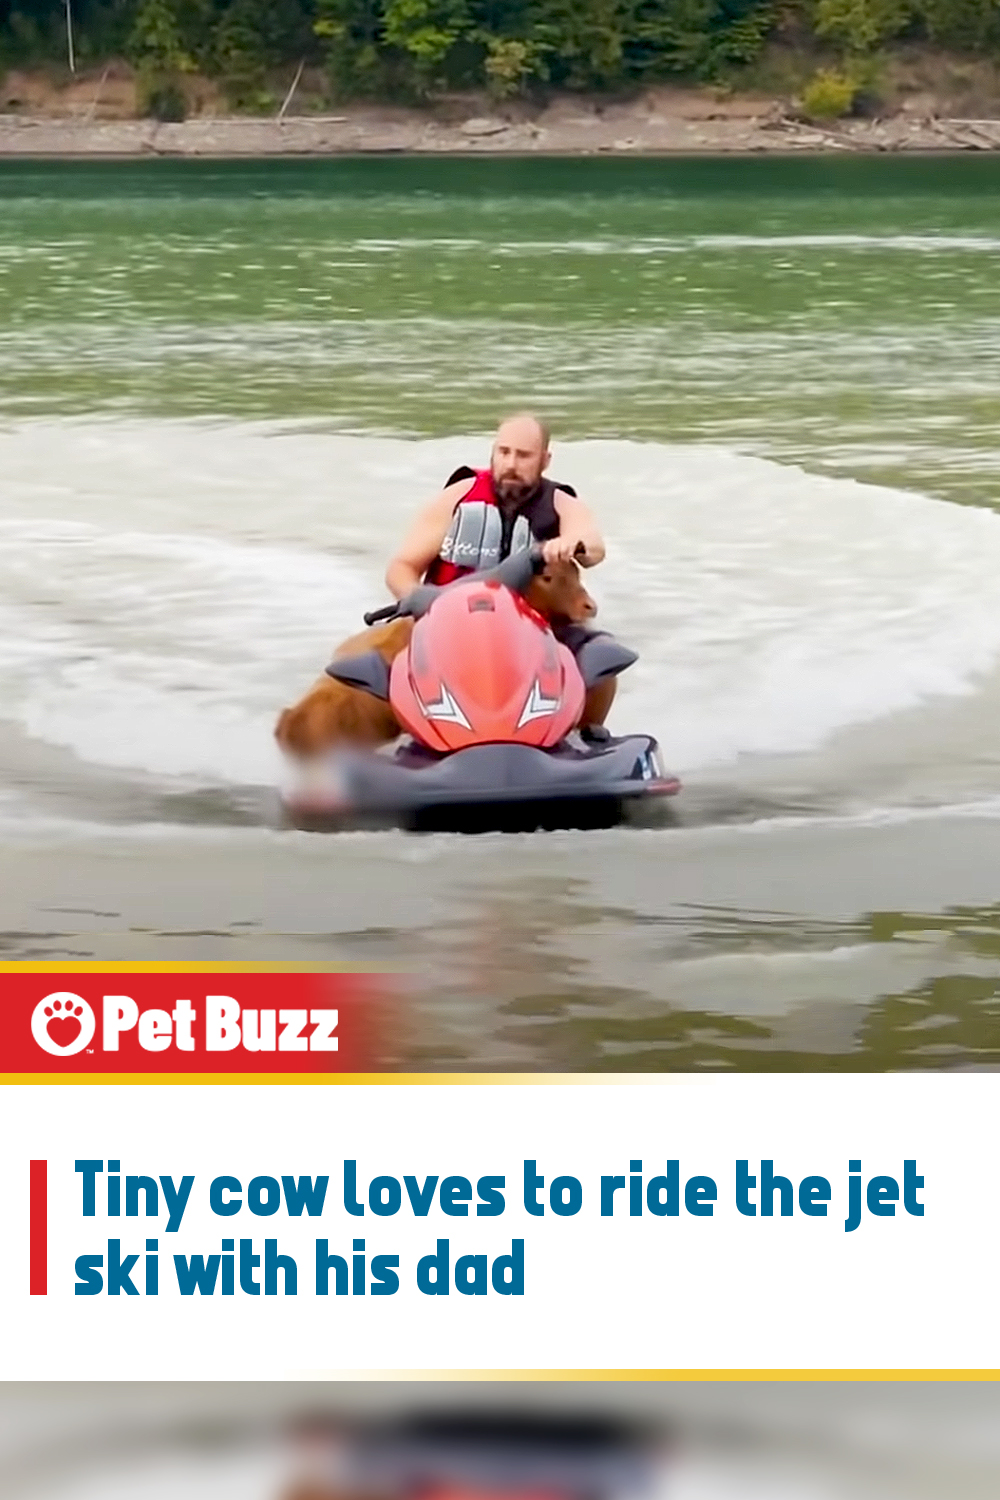 Tiny cow loves to ride the jet ski with his dad